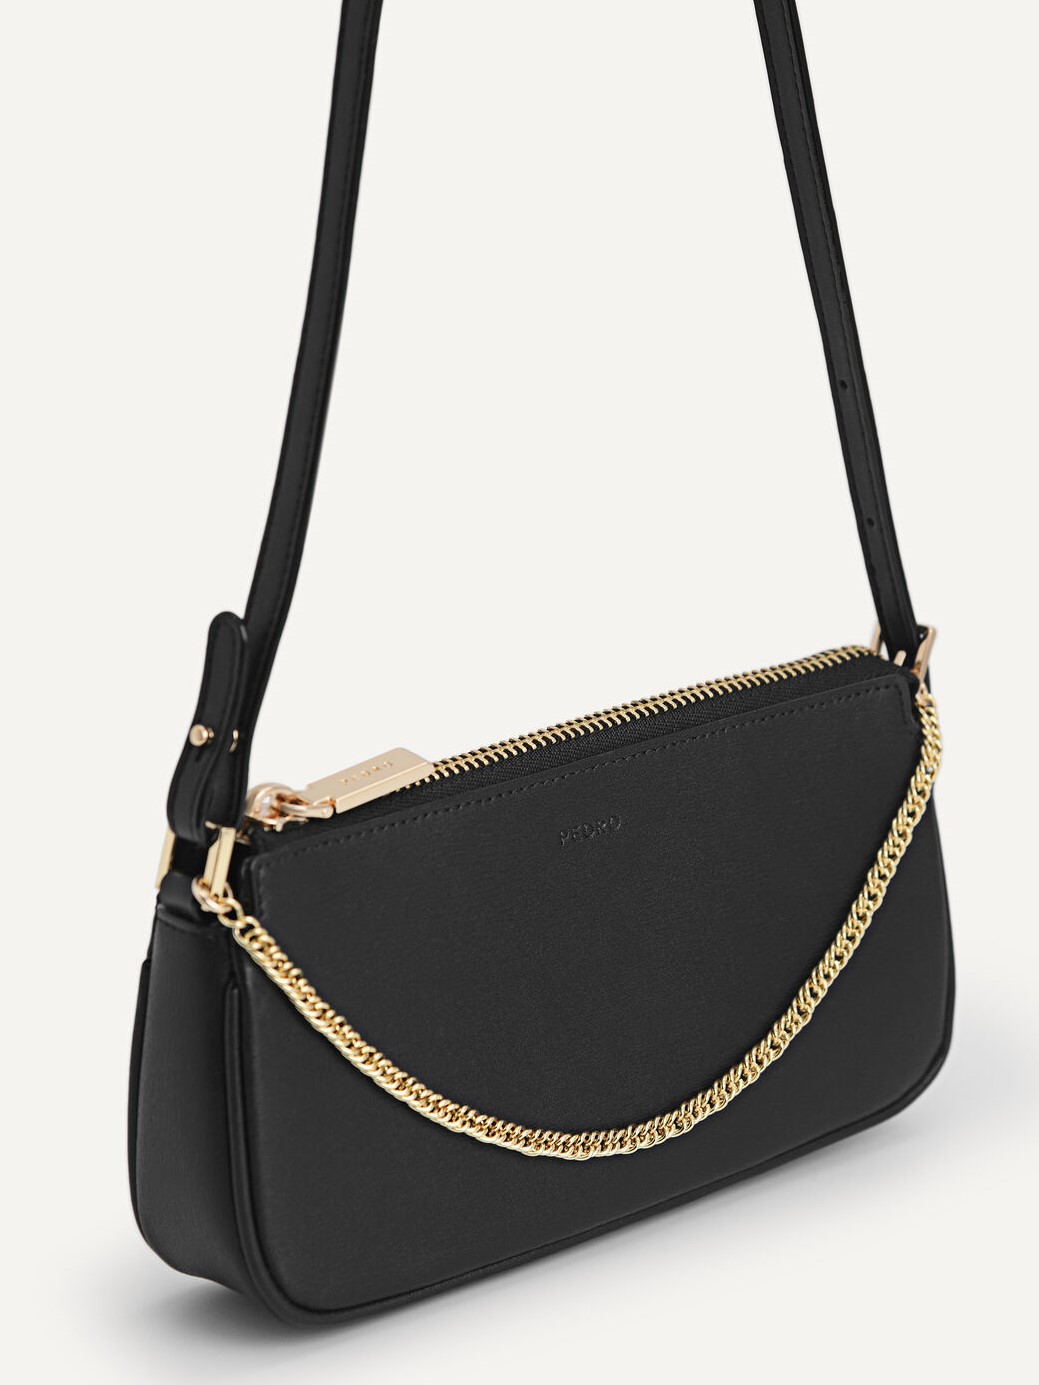 TÚI XÁCH PEDRO MADDY LEATHER CHAIN DETAILED SHOULDER BAG 10